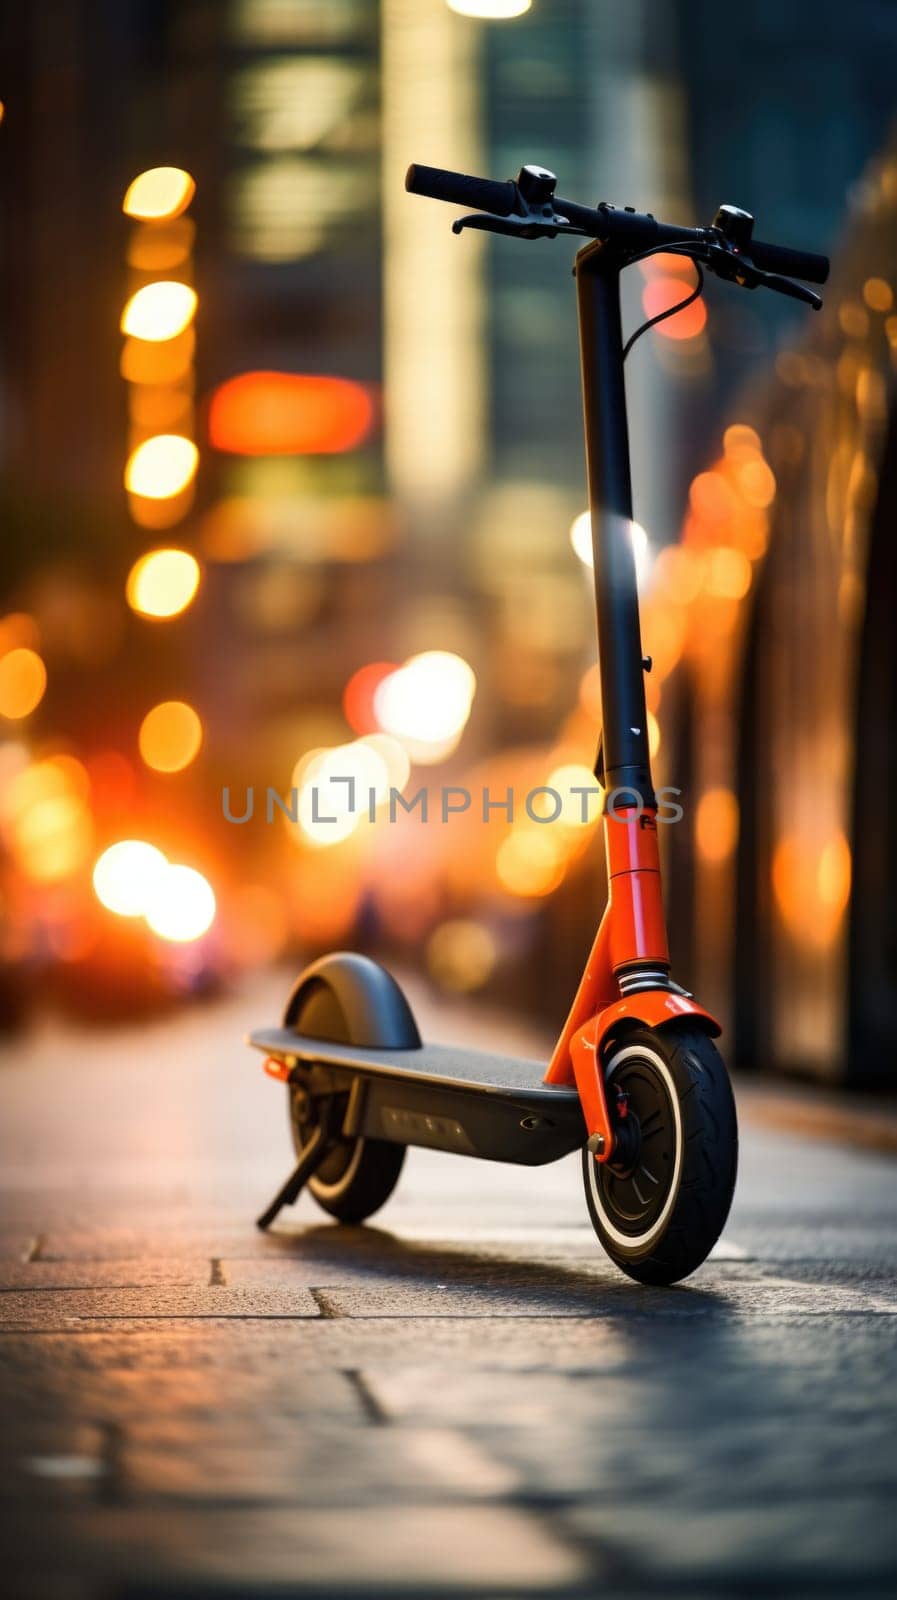 An orange electric scooter sitting on the street at night